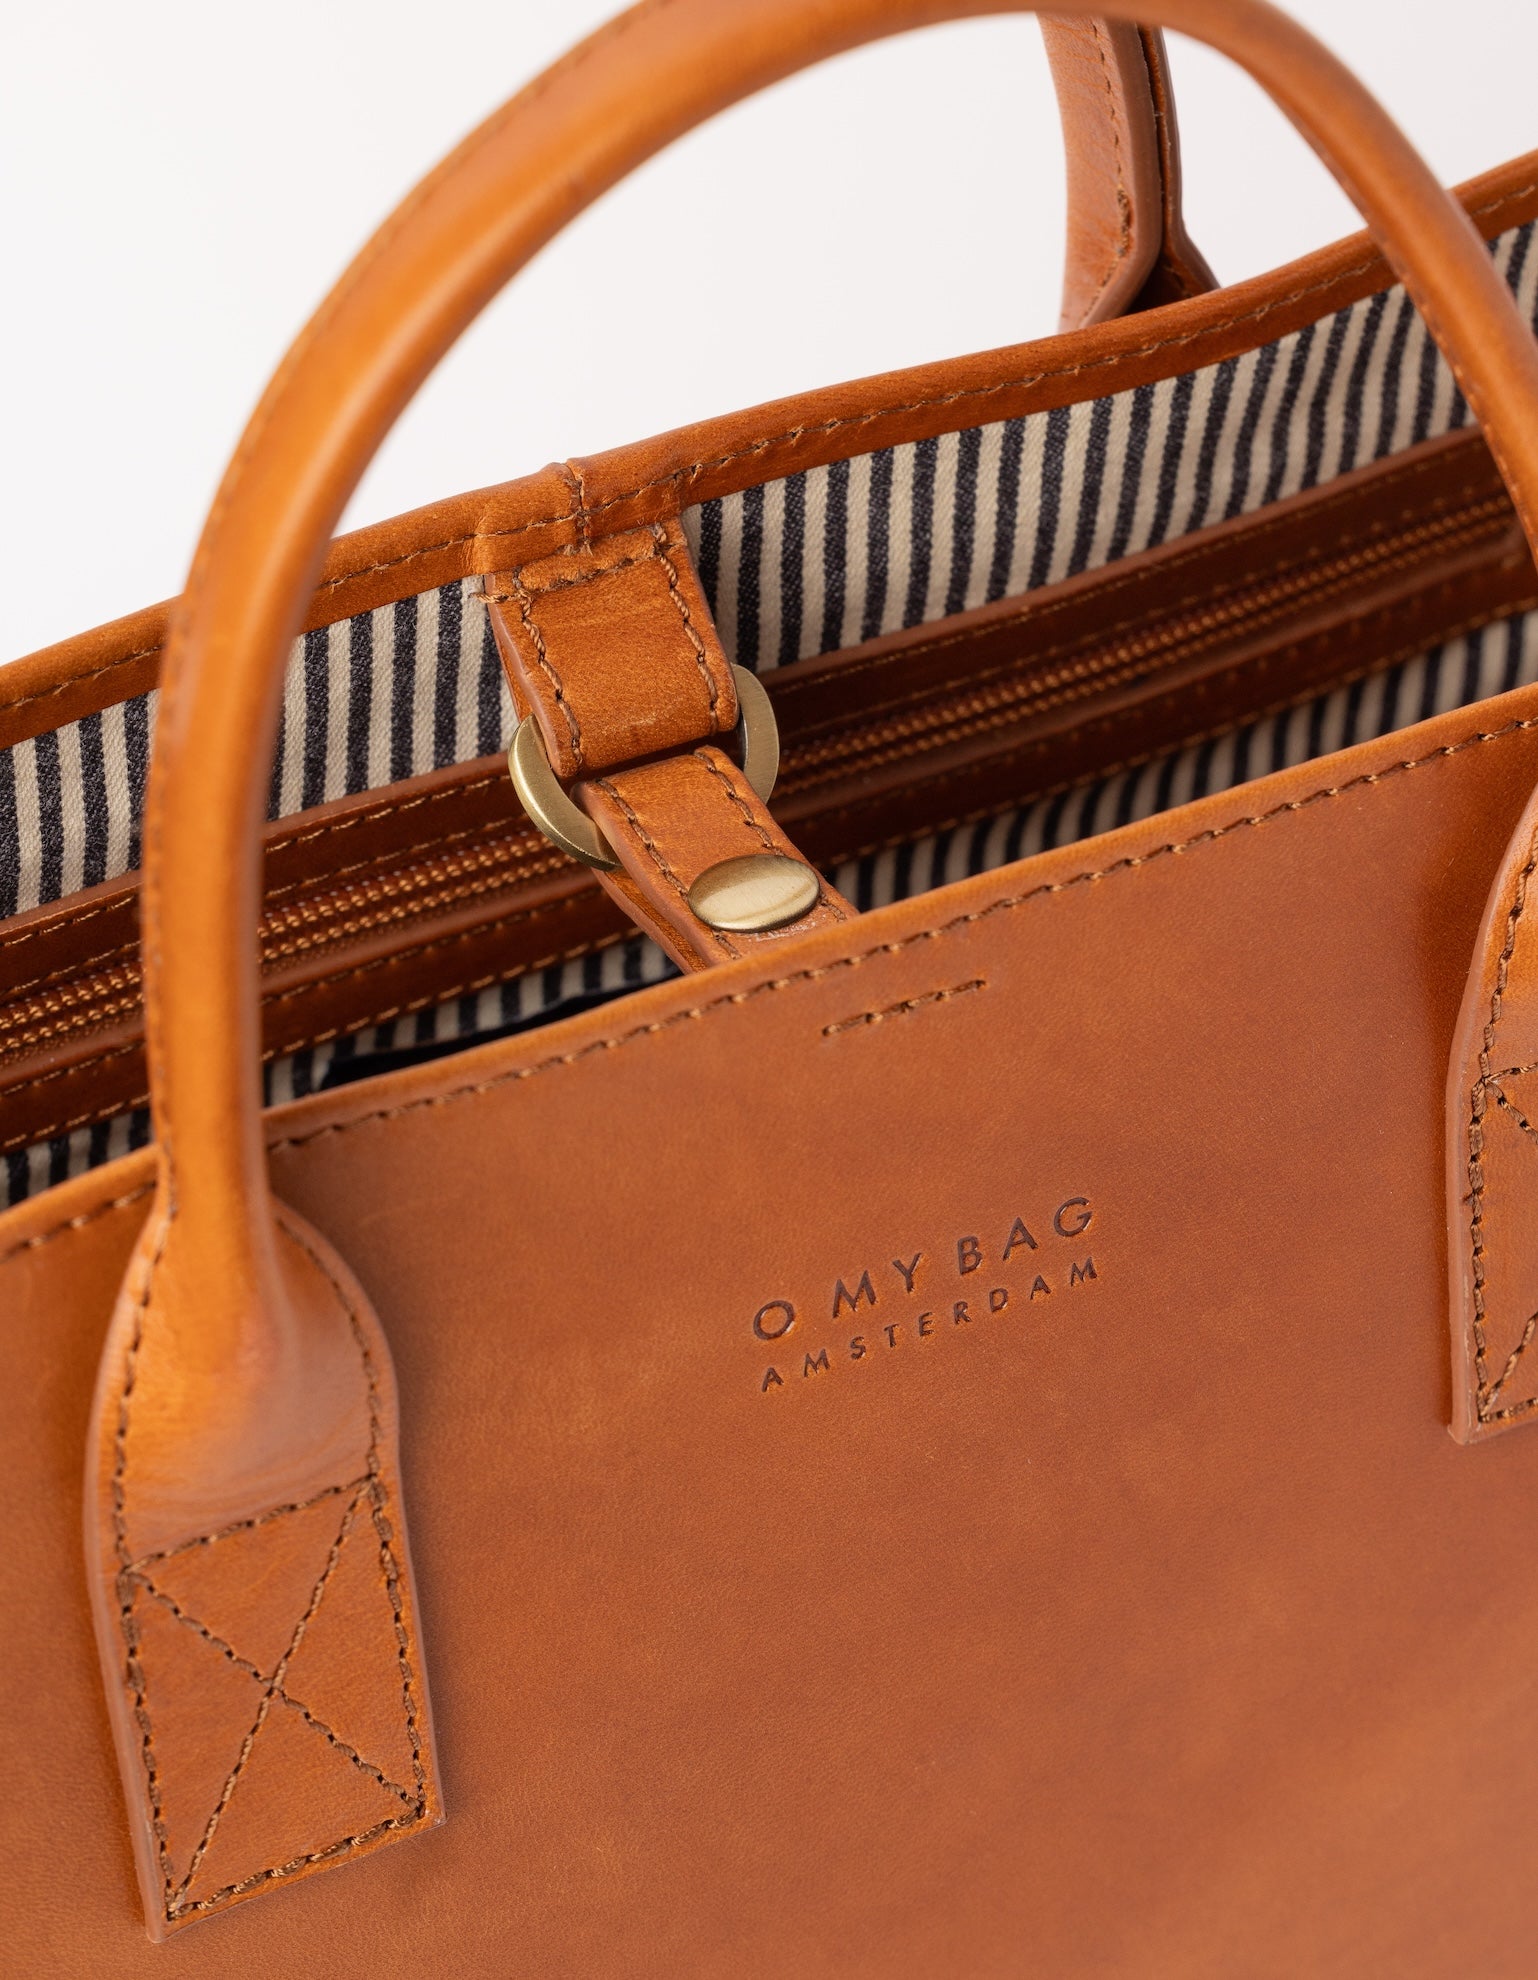 Rectangle shaped leather tote bag - close-up product image